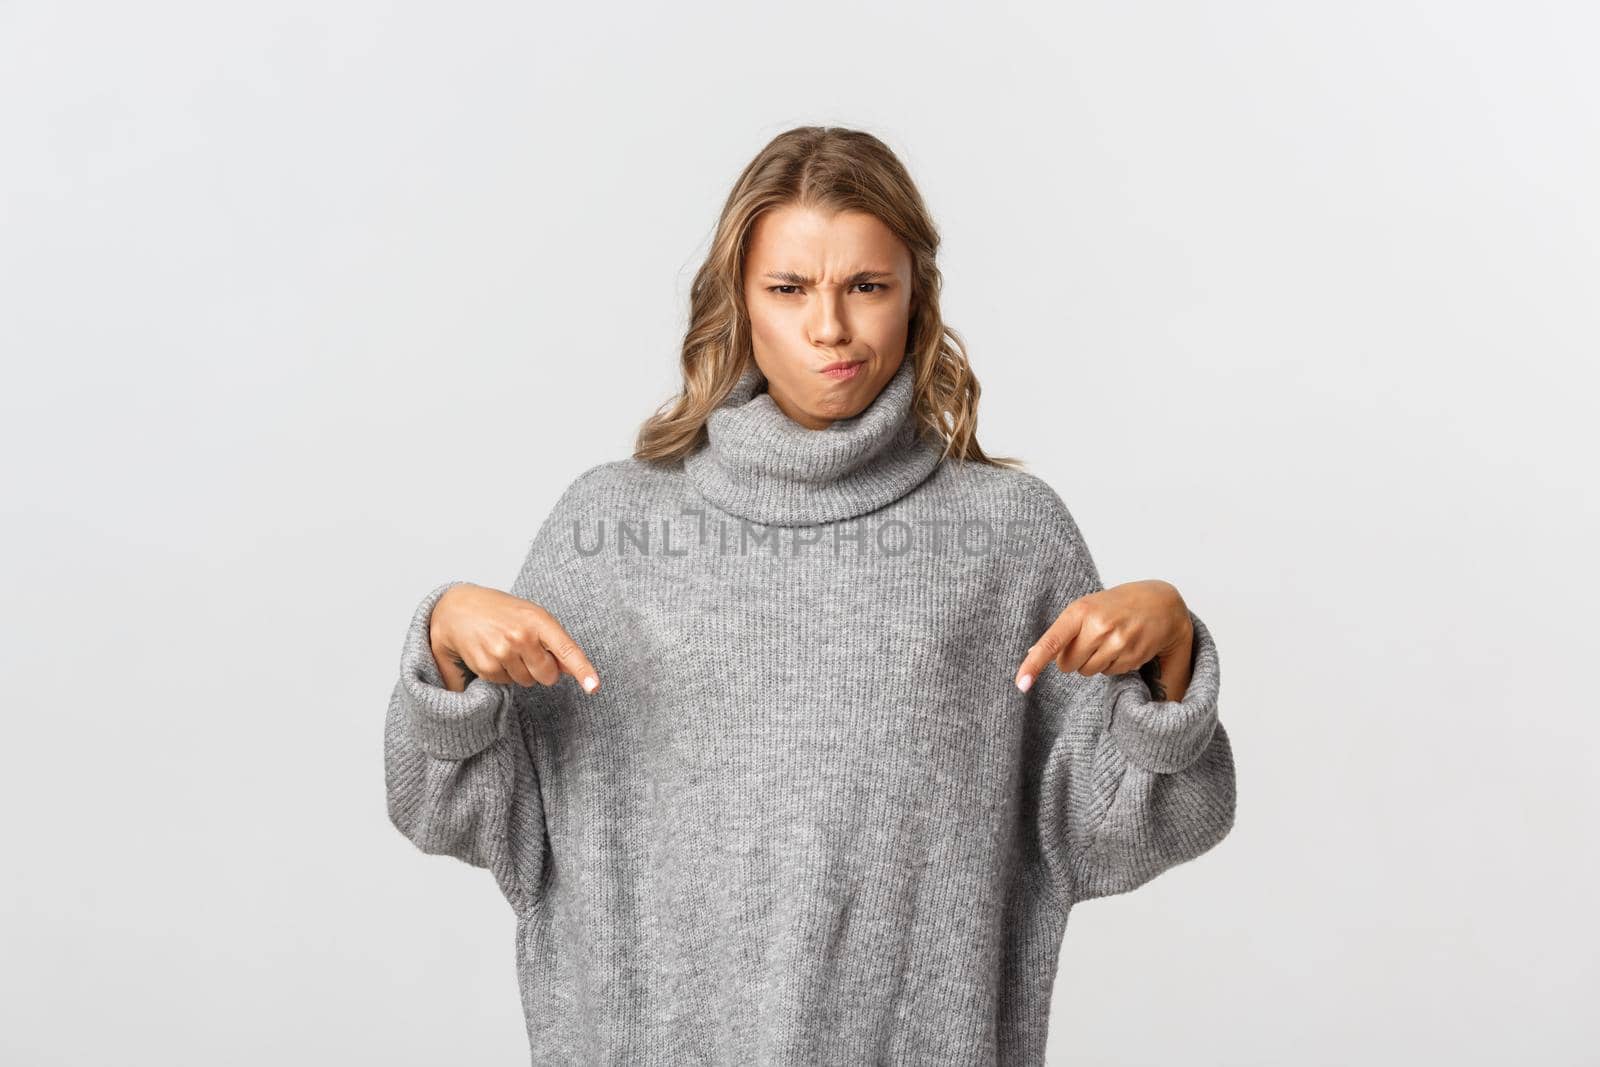 Image of doubtful and skeptical blond girl, frowning and pouting displeased, pointing fingers down at something bad, standing over white background.